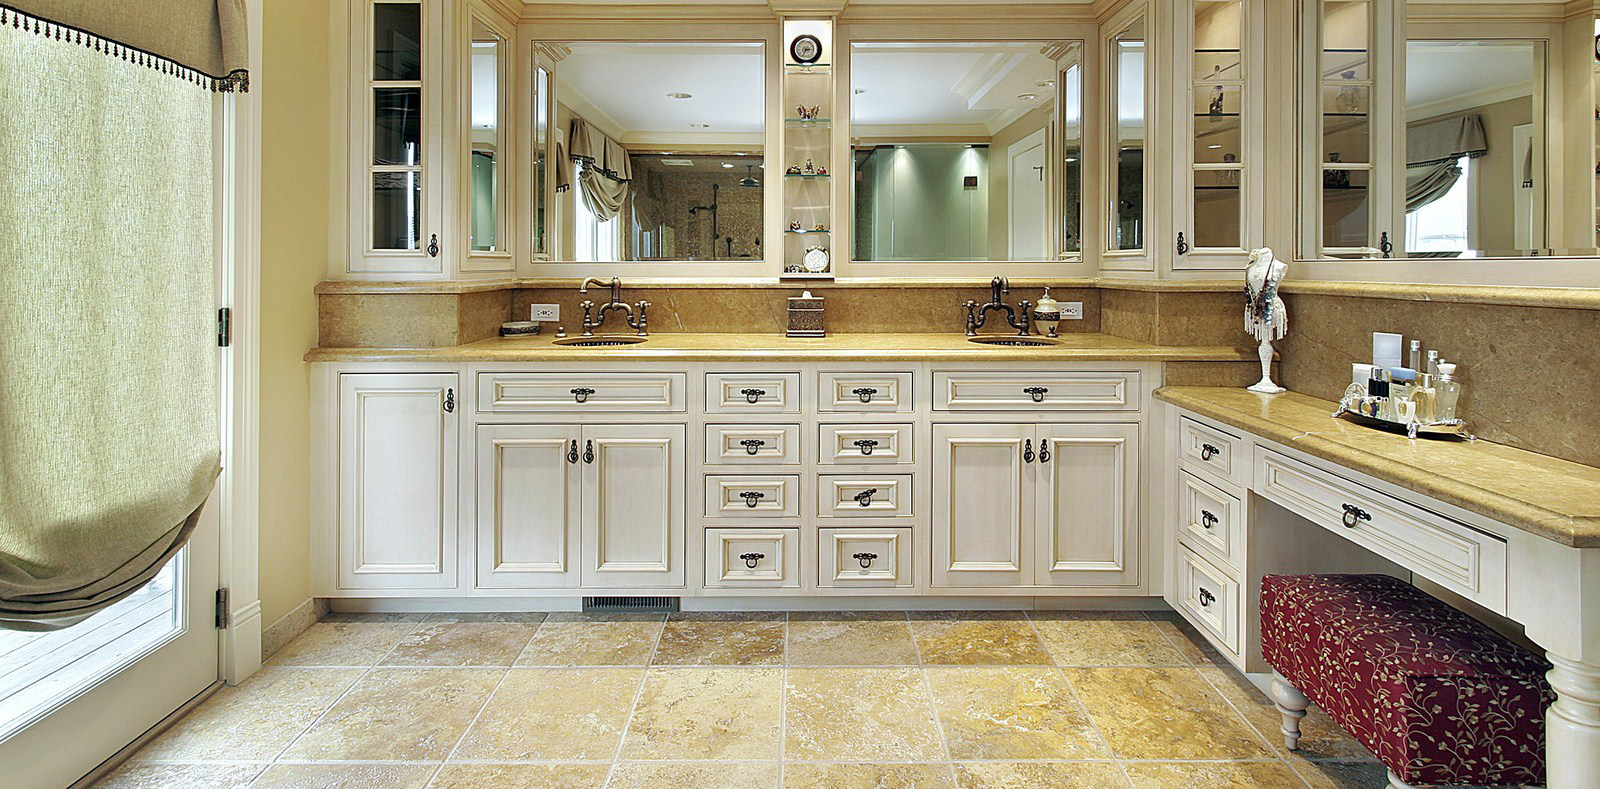 Kitchen Cleanliness Granite Worktops Makes Easy Cleaning My truly How To Care For Granite Kitchen Countertops